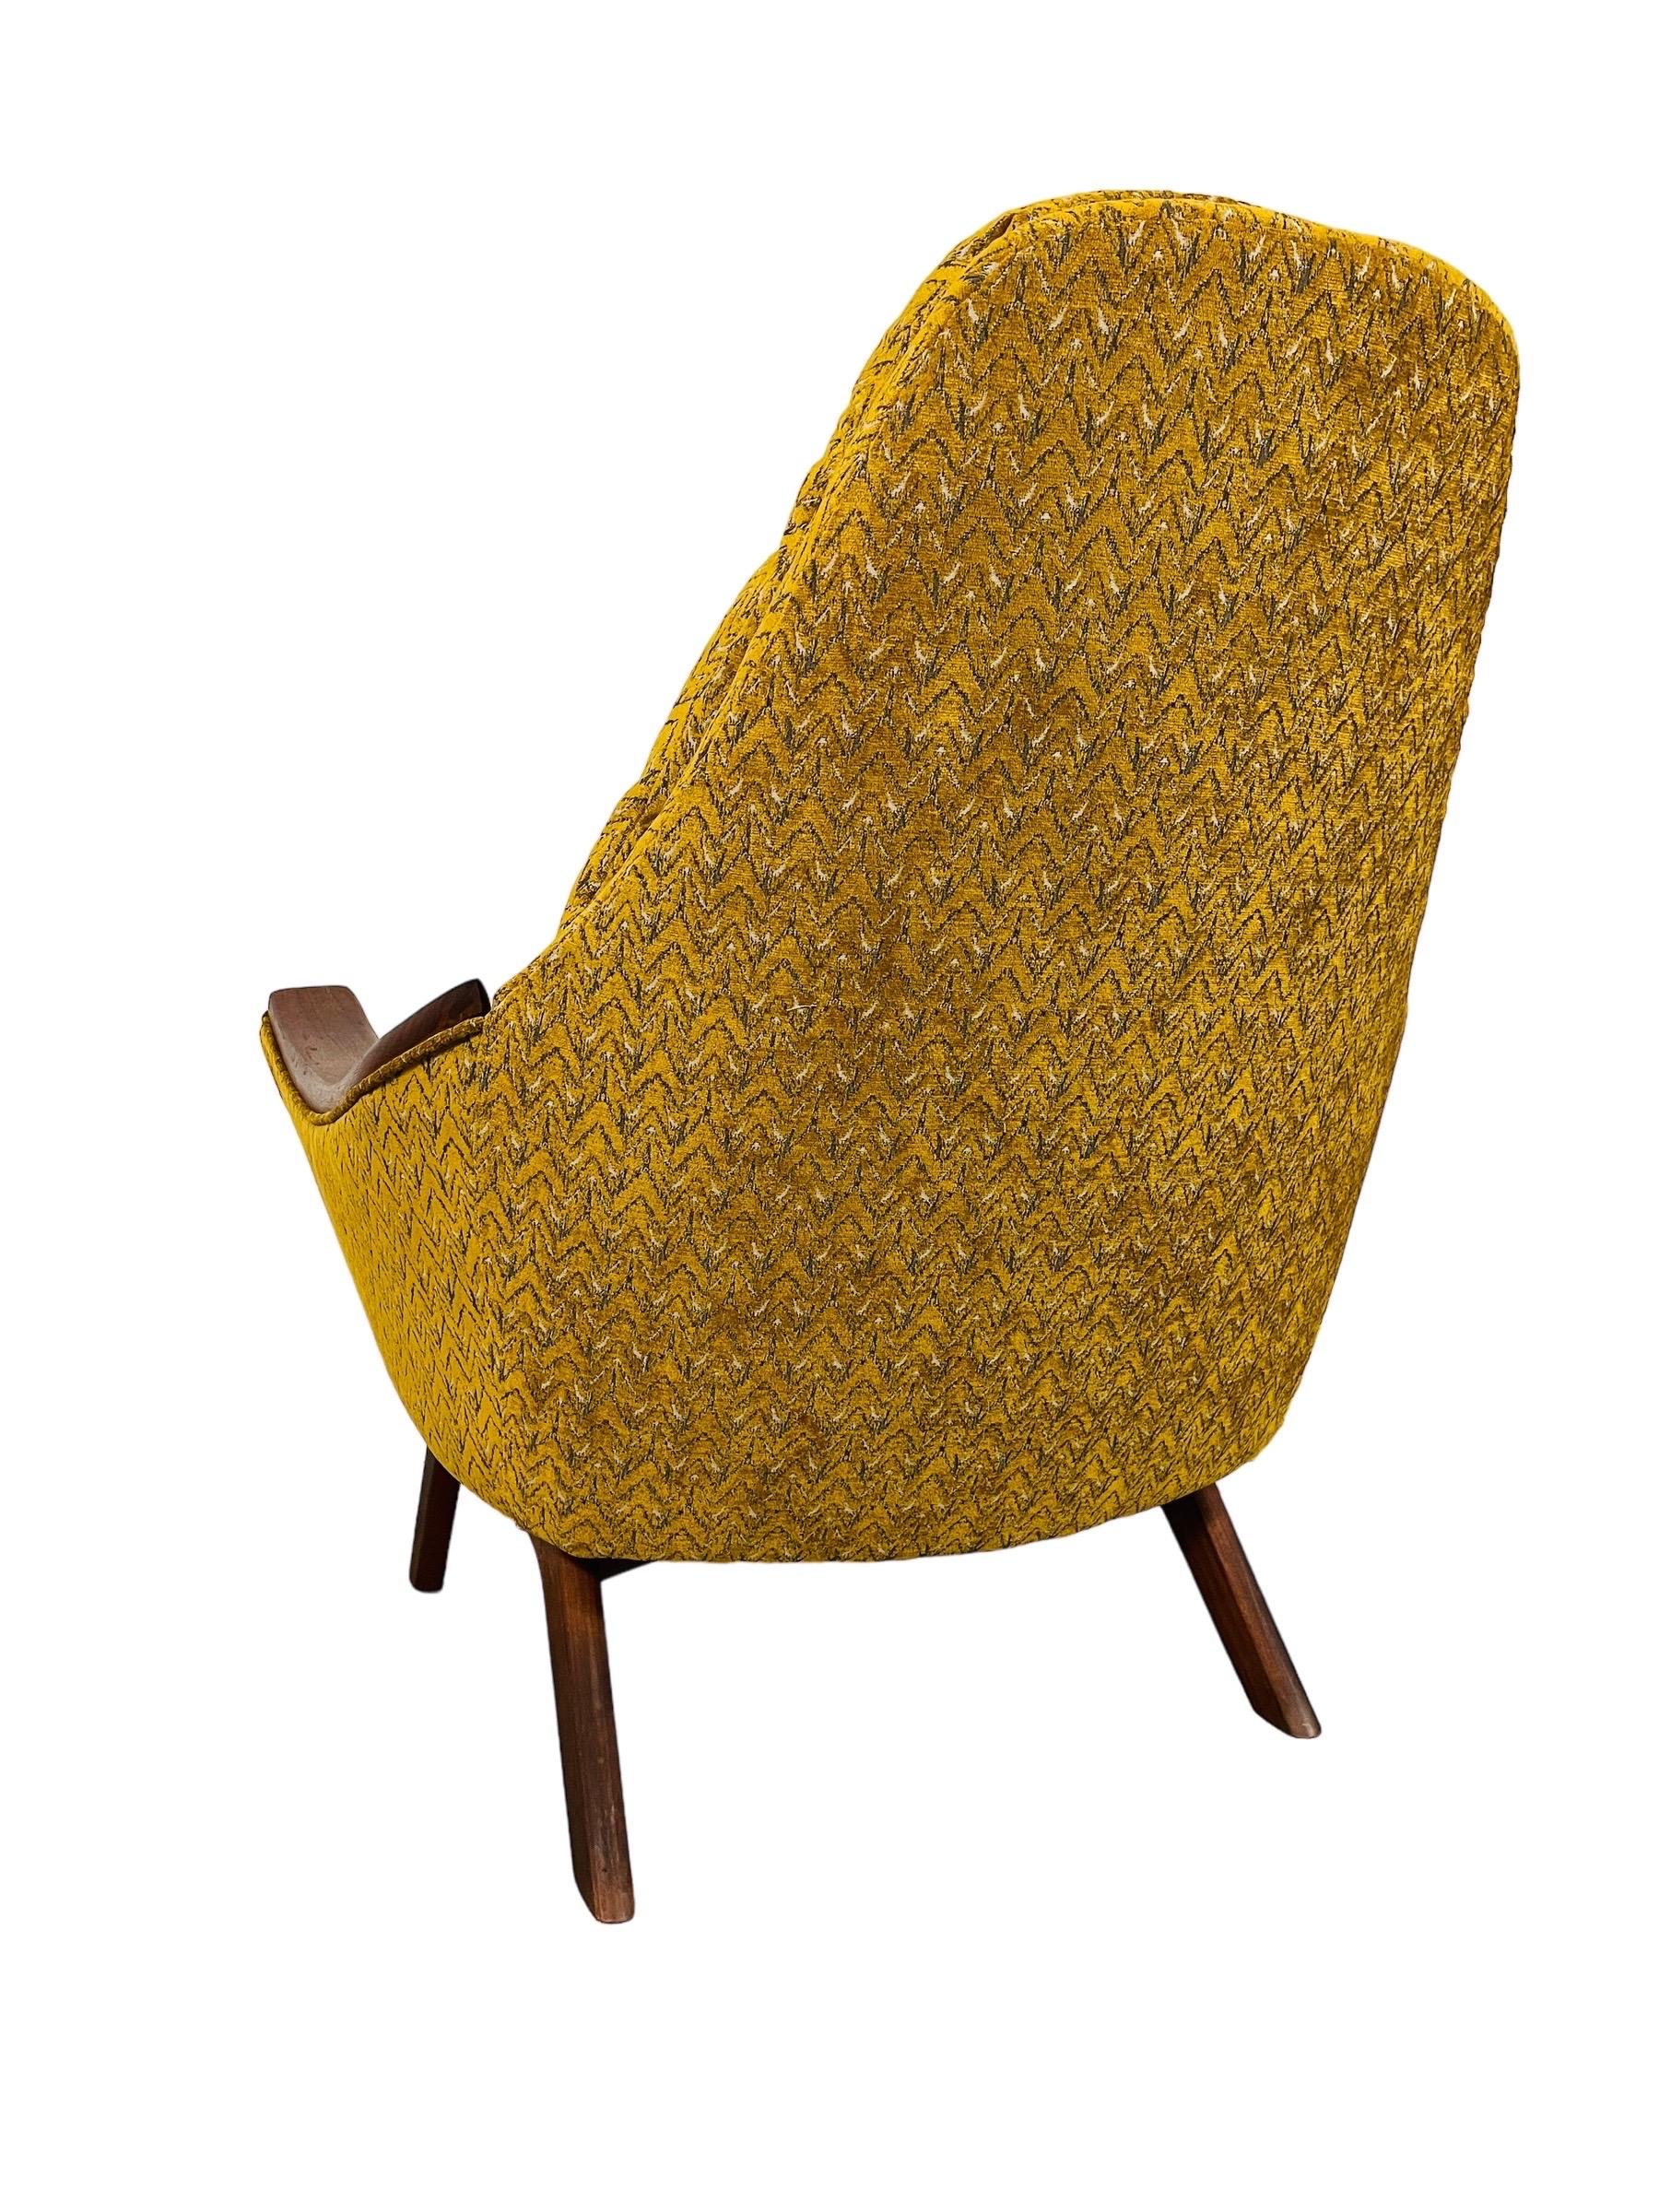 American Adrian Pearsall Lounge Chair For Sale